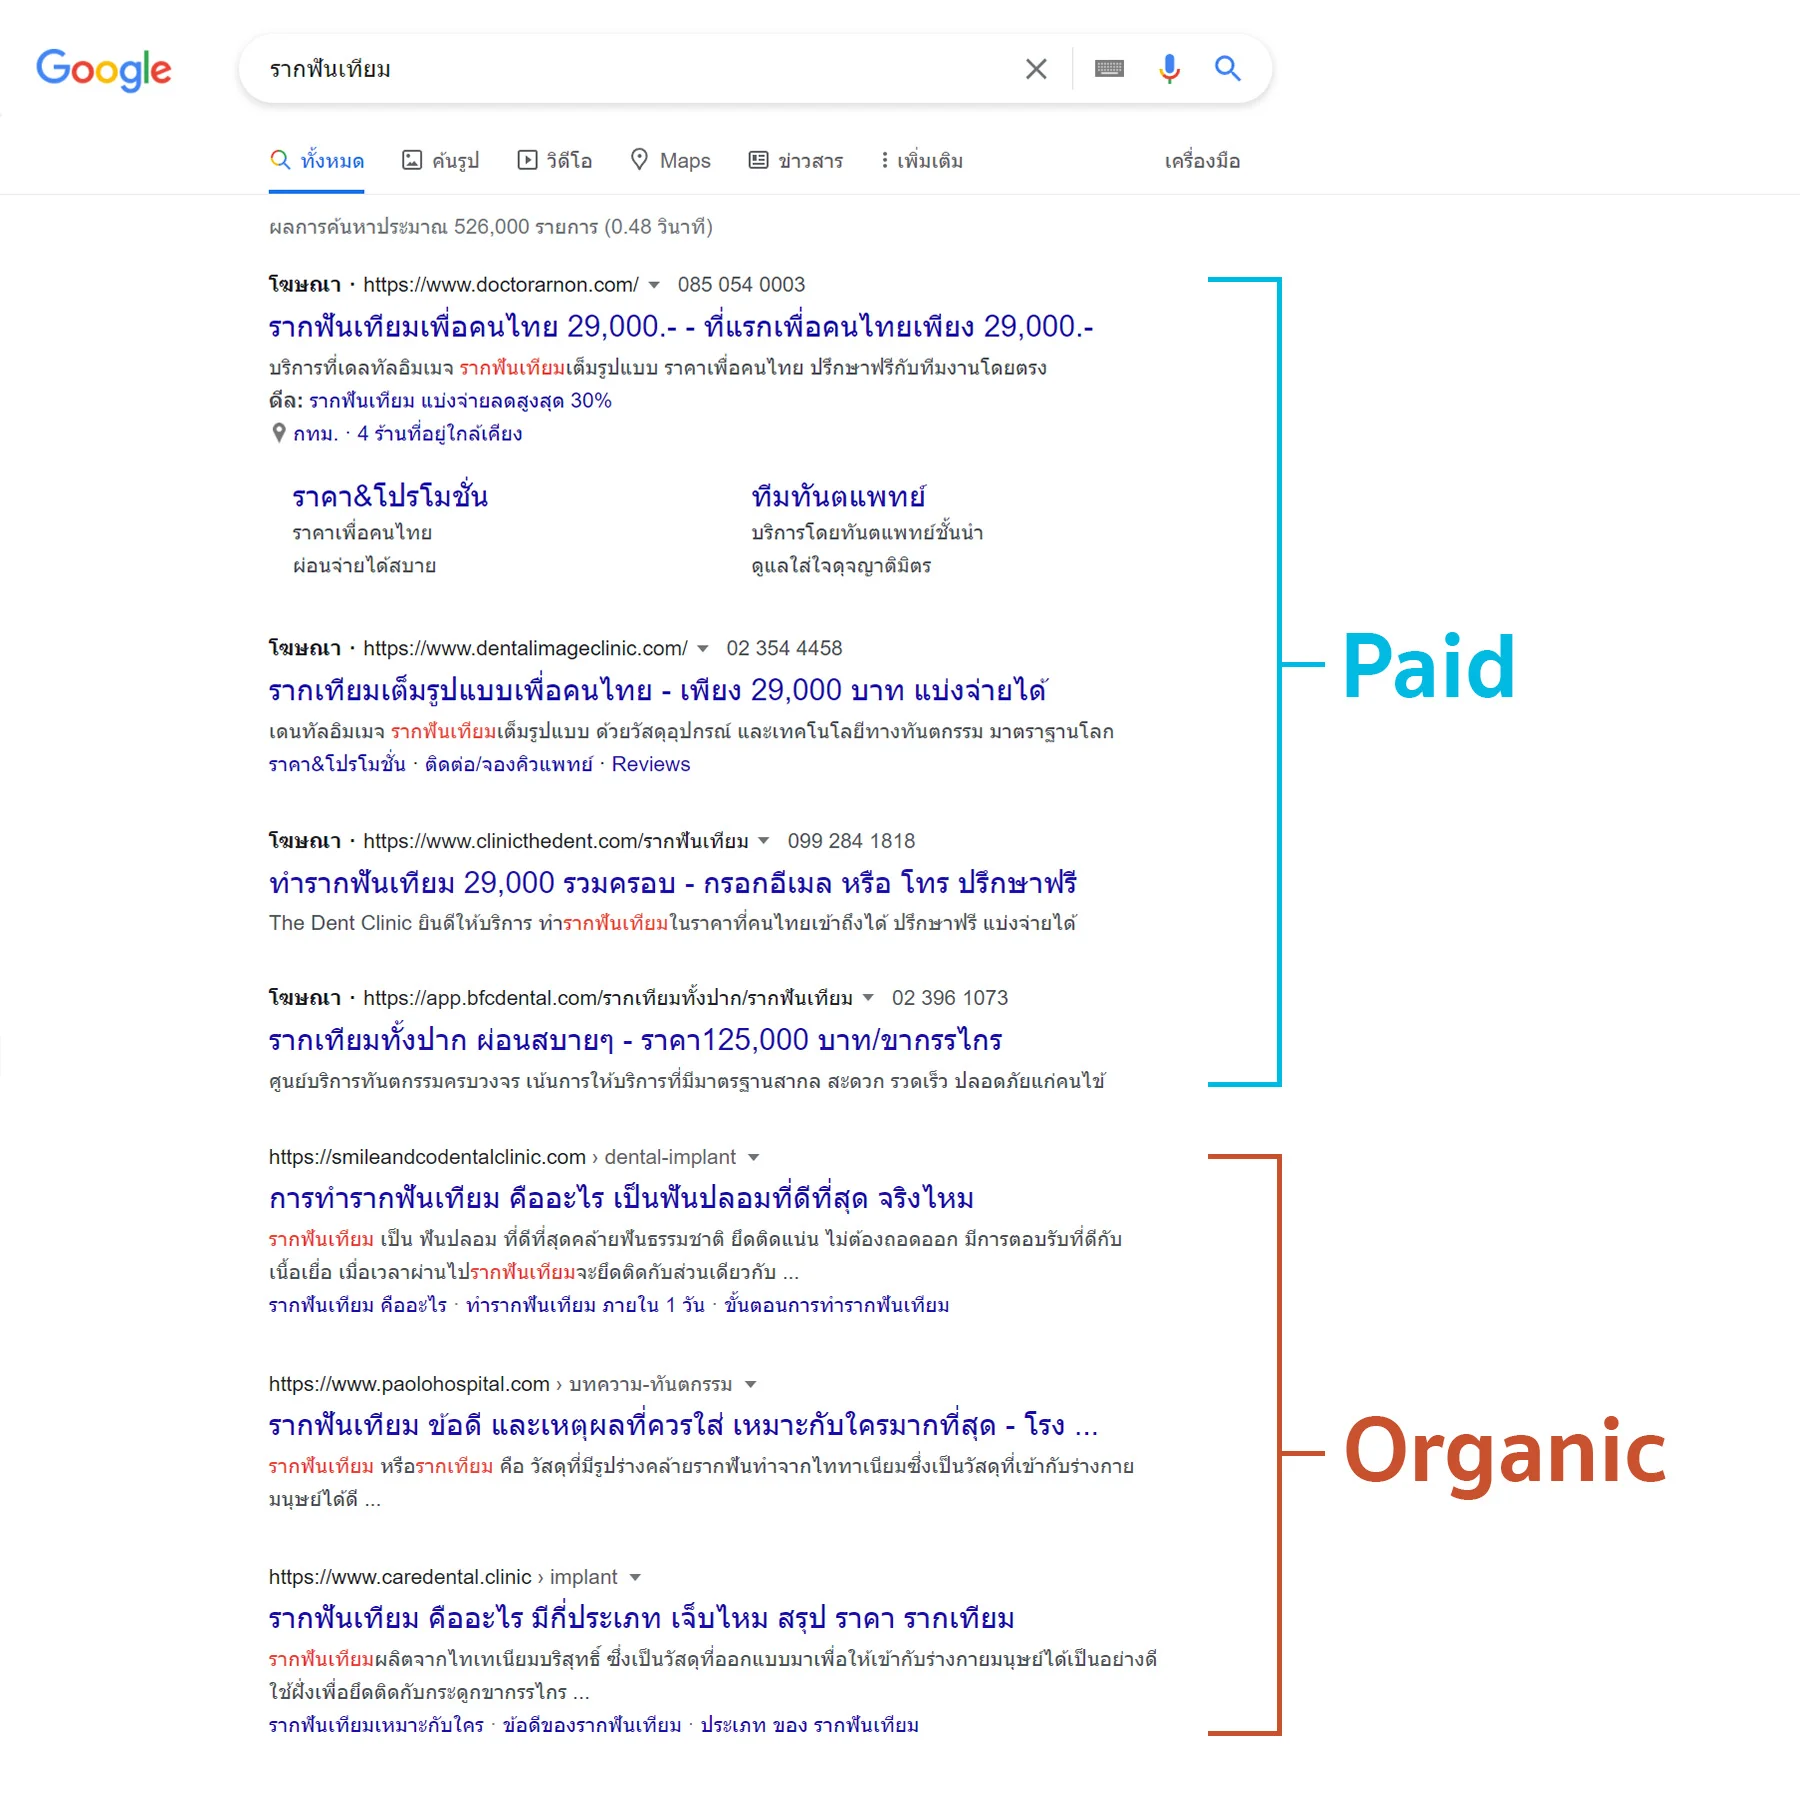 organic vs paid search results